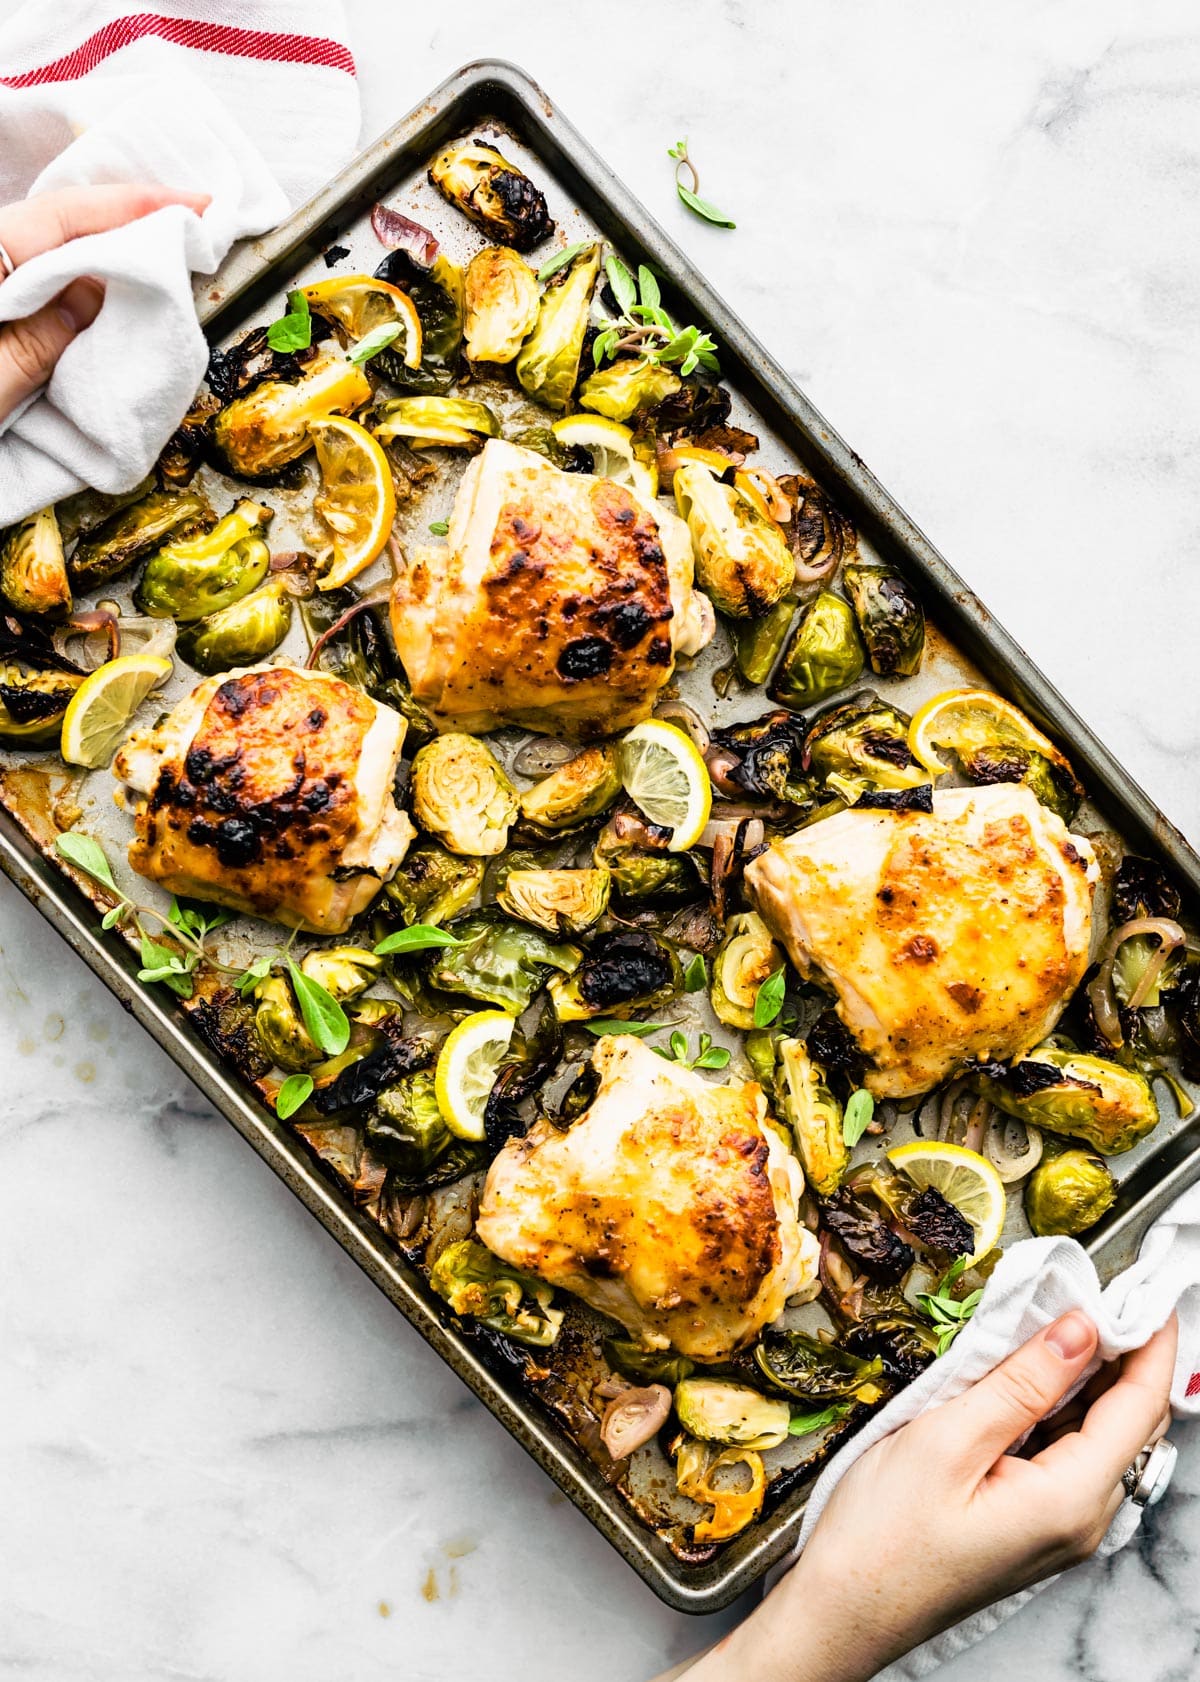 Honey Mustard Chicken Thighs with Brussels Sprouts on a sheet pan that just came out of the oven.